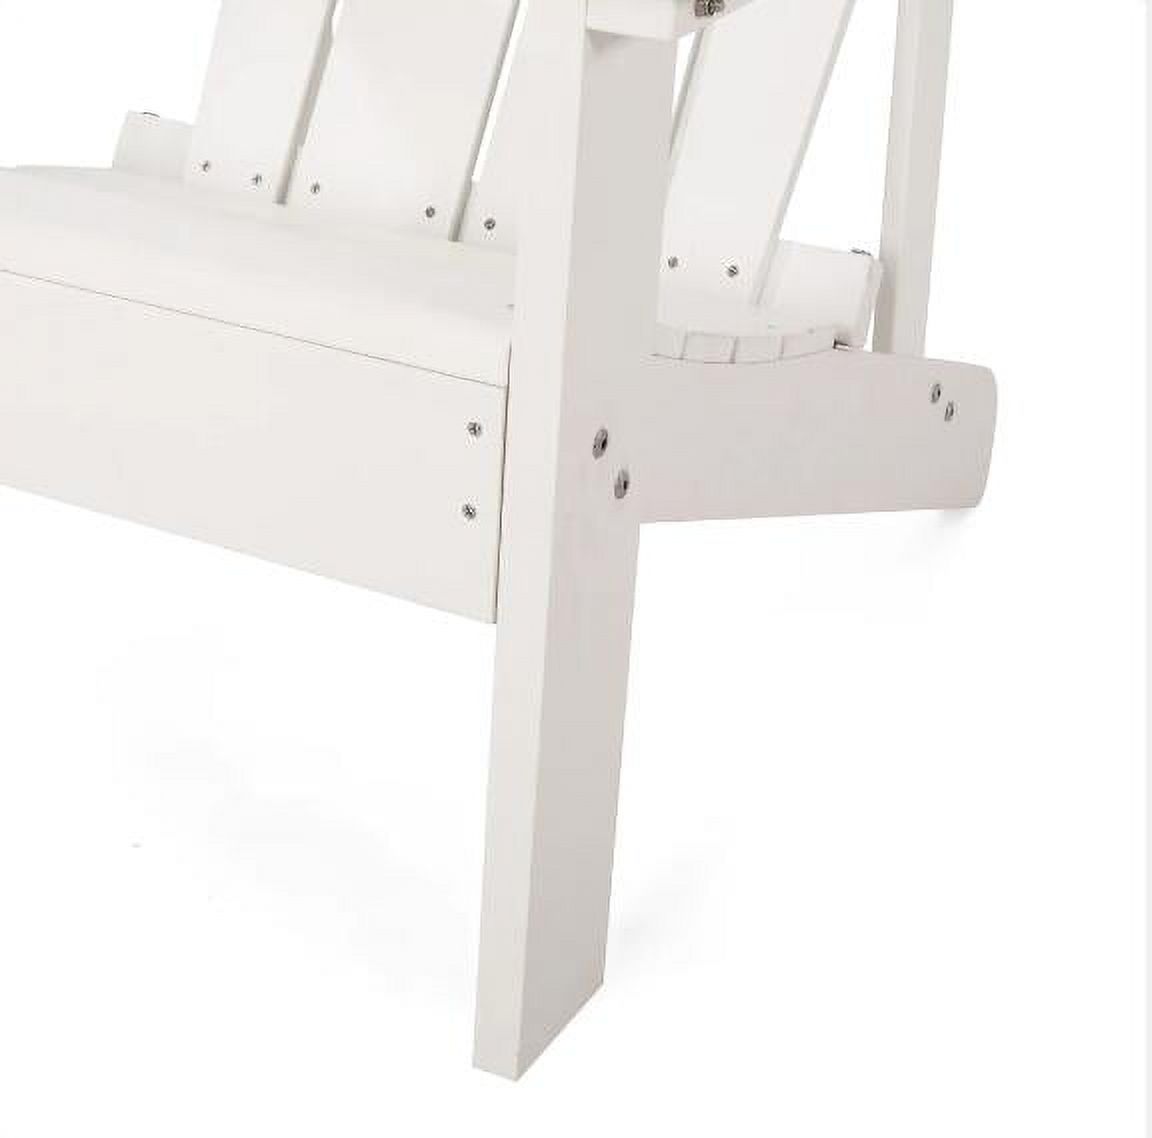 Classic Pure White Outdoor Solid Wood Adirondack Chair Garden Lounge Chair - image 4 of 7